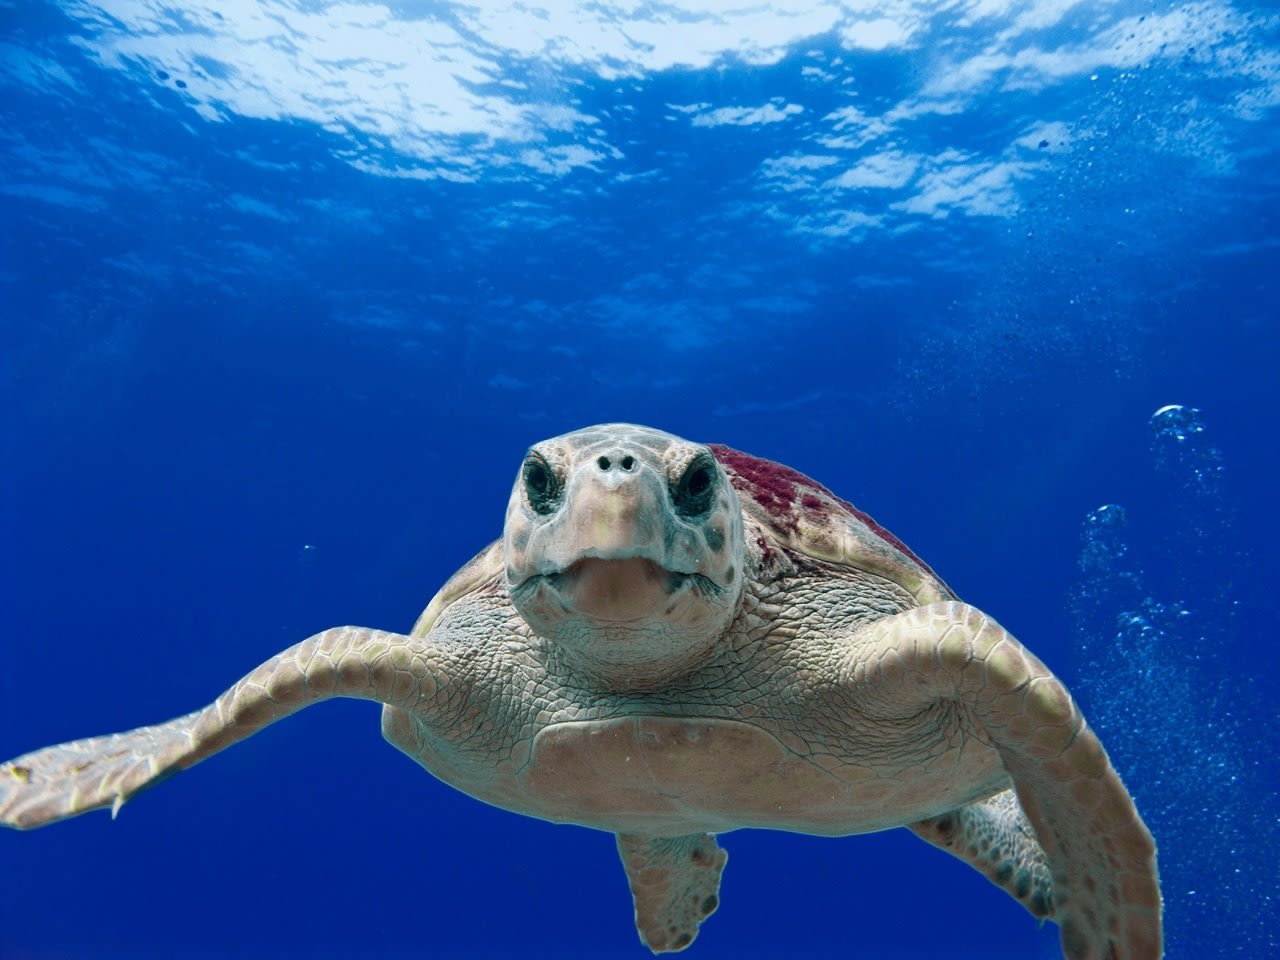 Hoping to protect turtles, feds announce limited fishing restrictions off West Coast